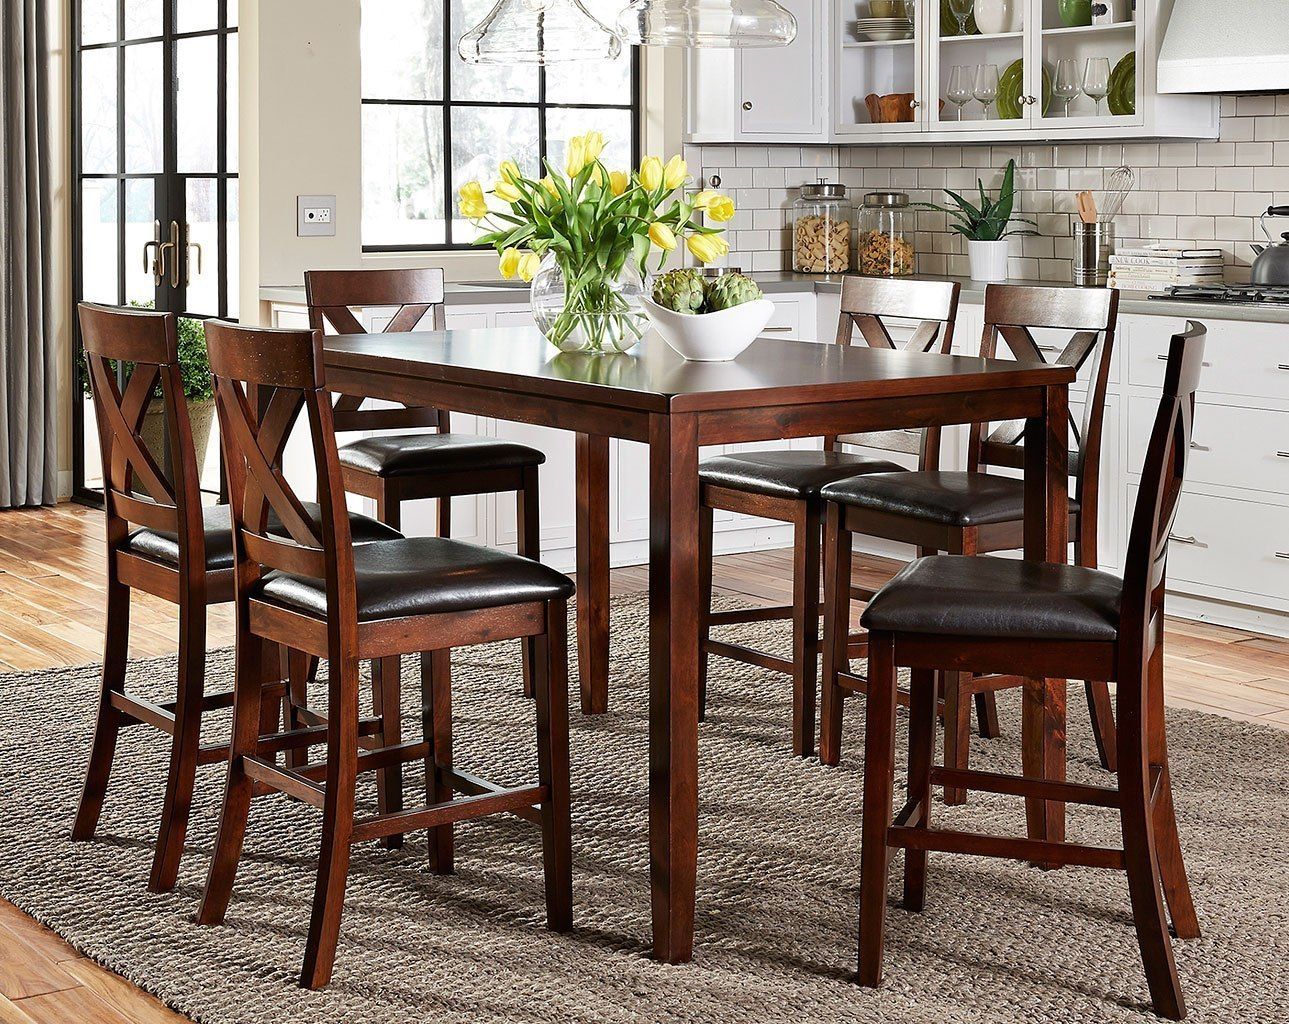 Debby Small Space 3 Piece Dining Sets With Regard To Most Current Thornton 7 Piece Counter Height Dining Setliberty Furniture (View 8 of 20)